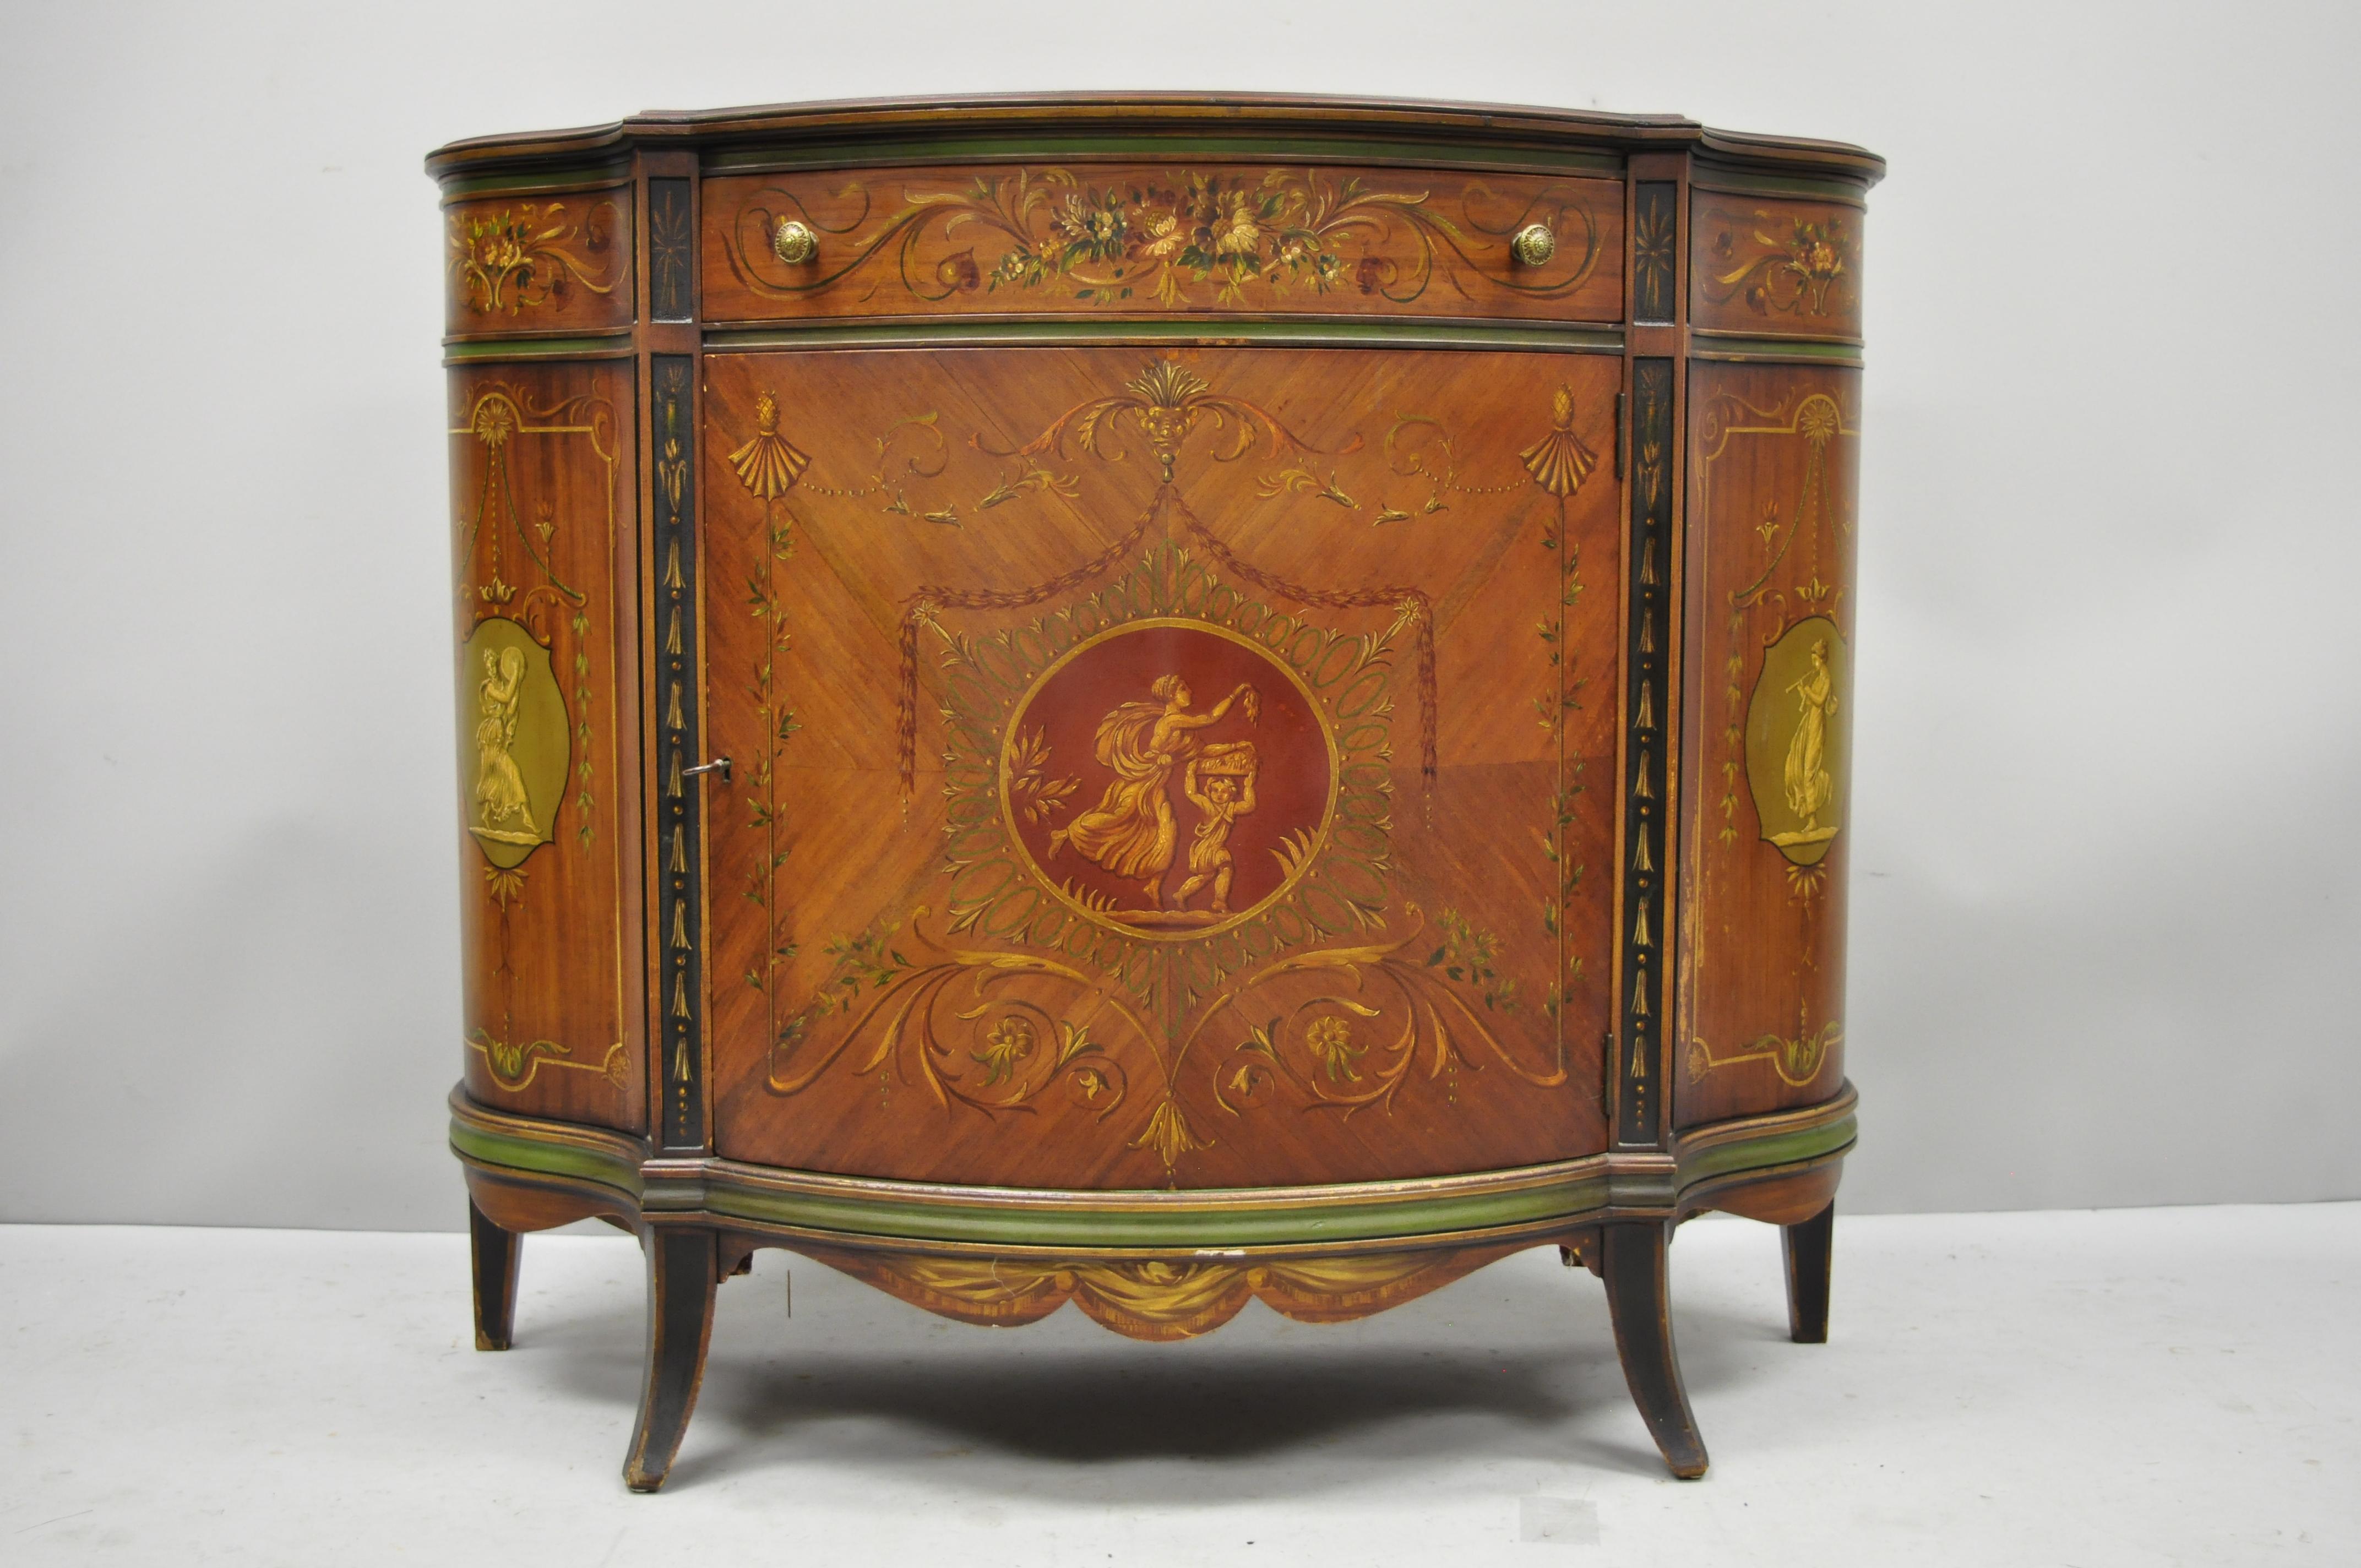 Johnson Handley Adams style paint decorated demilune Bombe commode. Item features hand painted details throughout, demilune form, original label, 1 dovetailed drawer, quality American craftsmanship, great style and form, circa early 20th century.